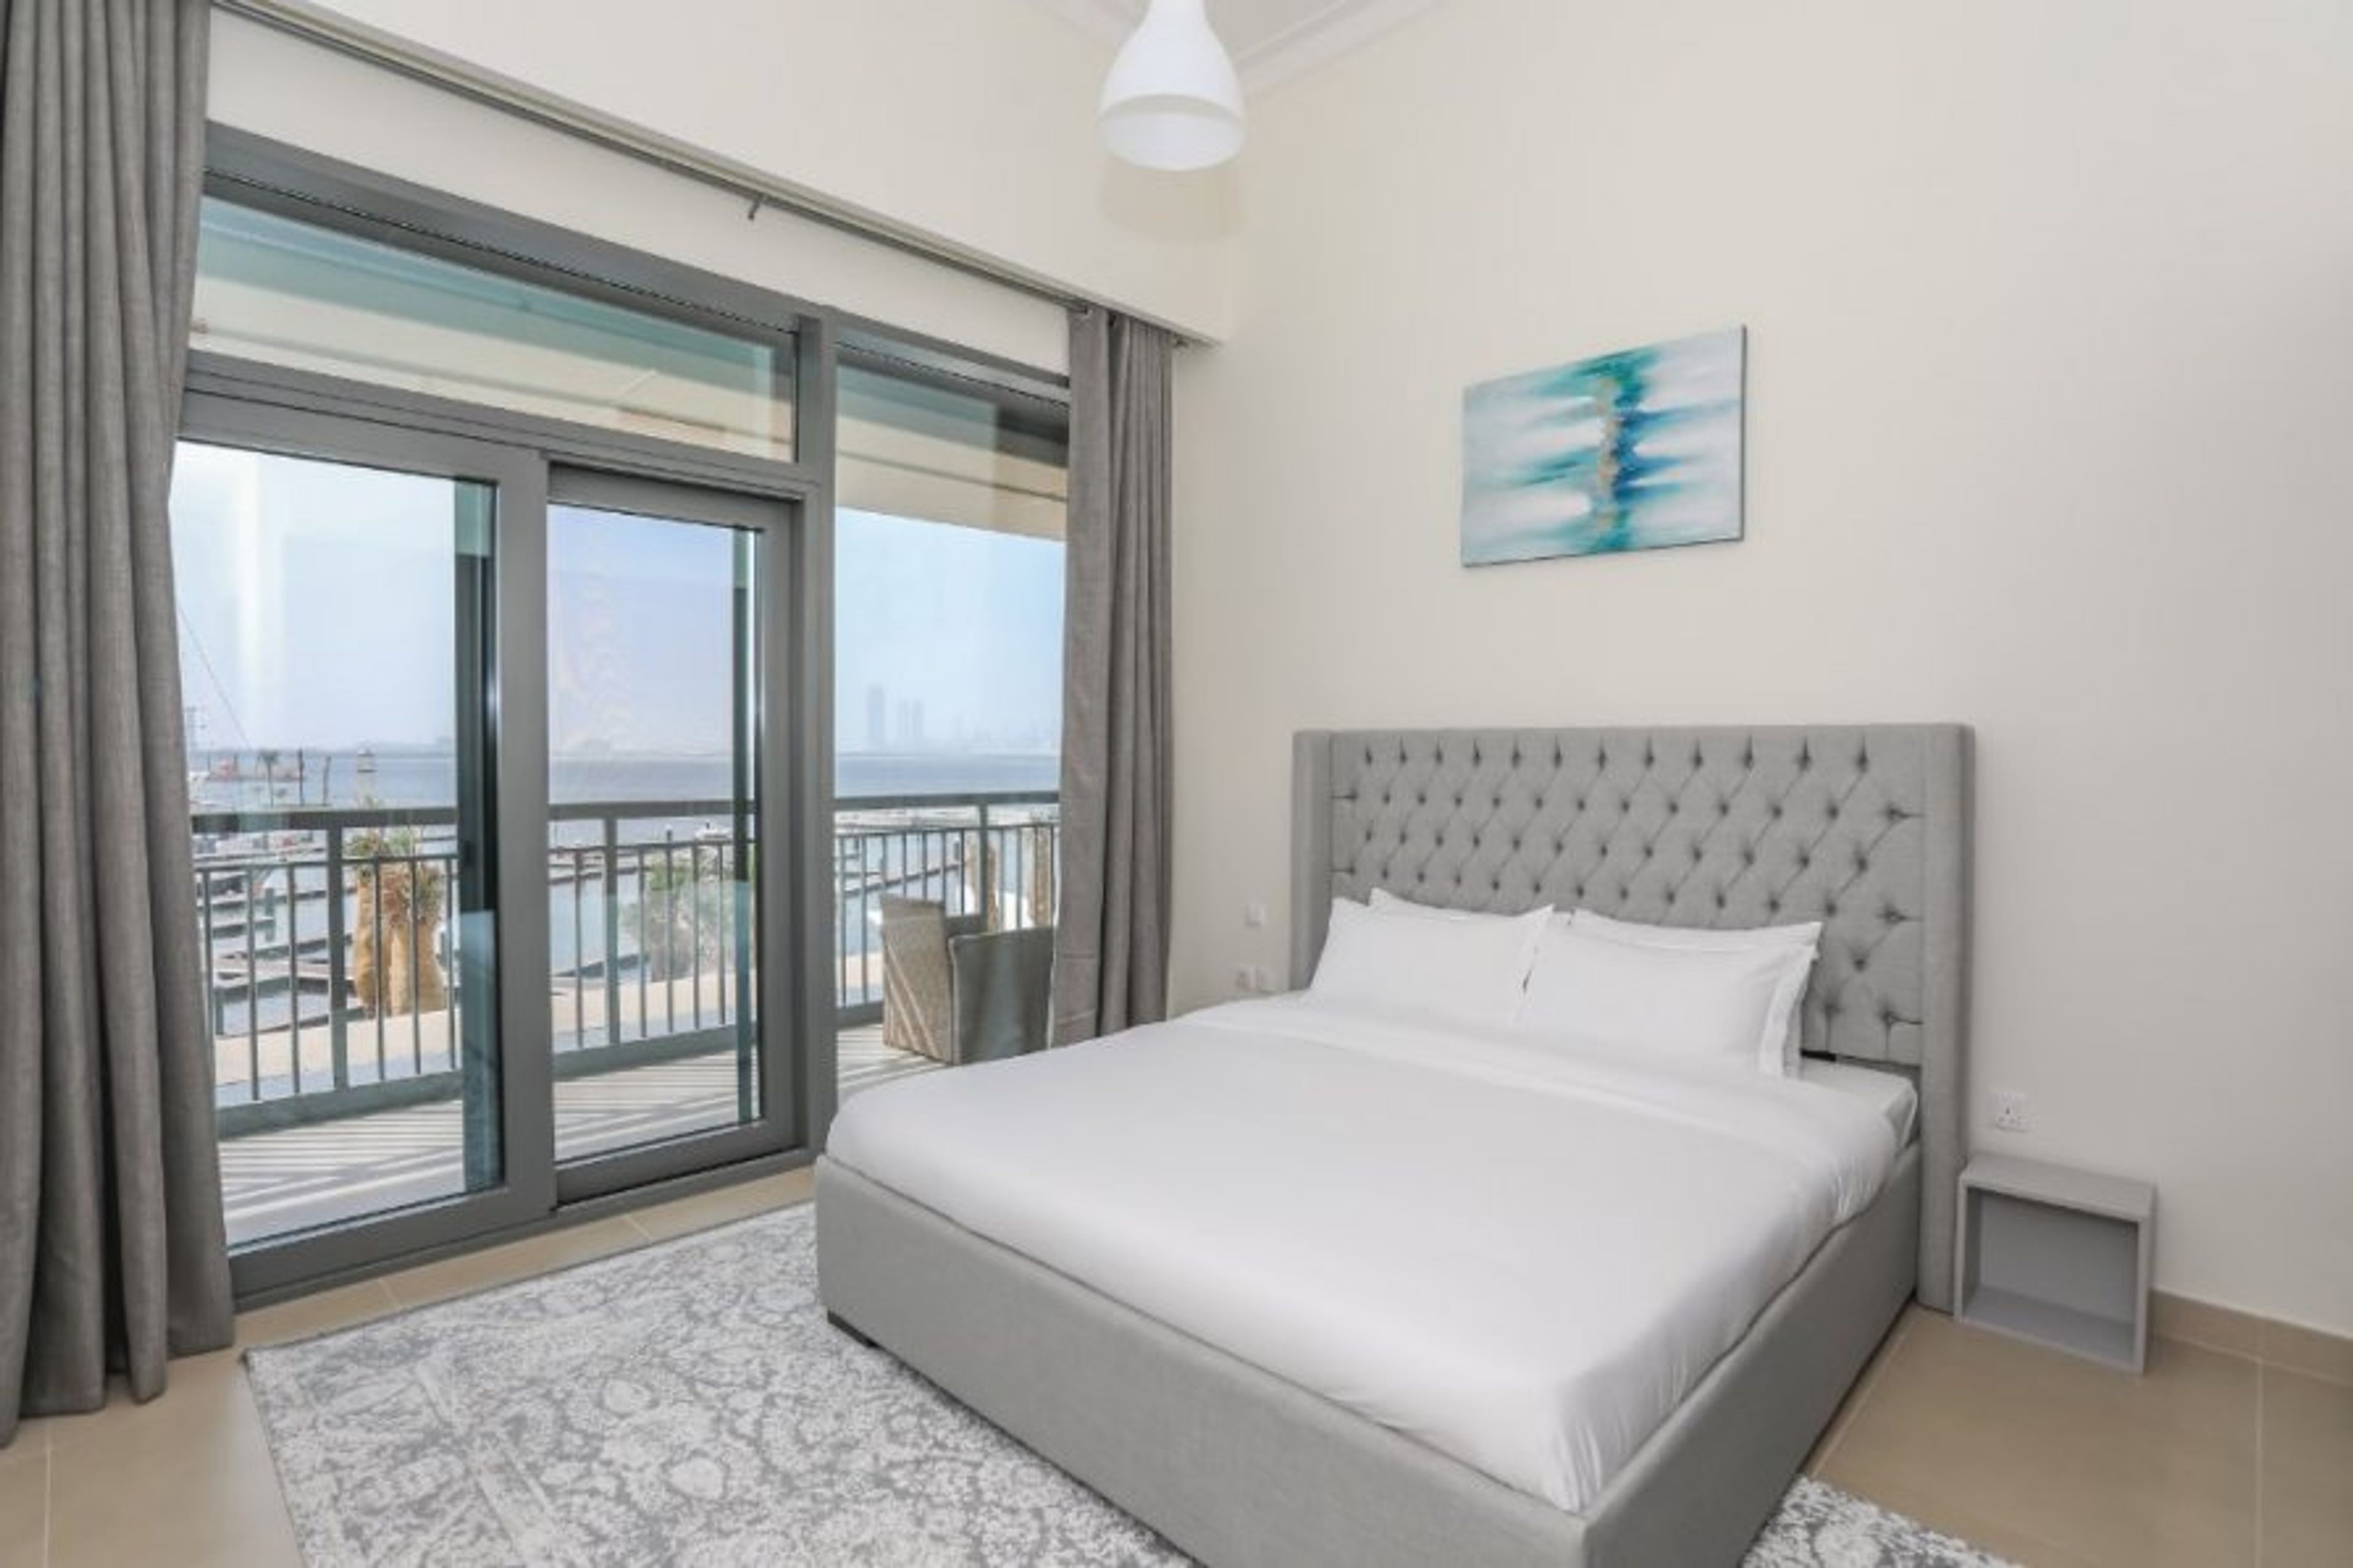 Comfortable nights rest and access to the spacious balcony.